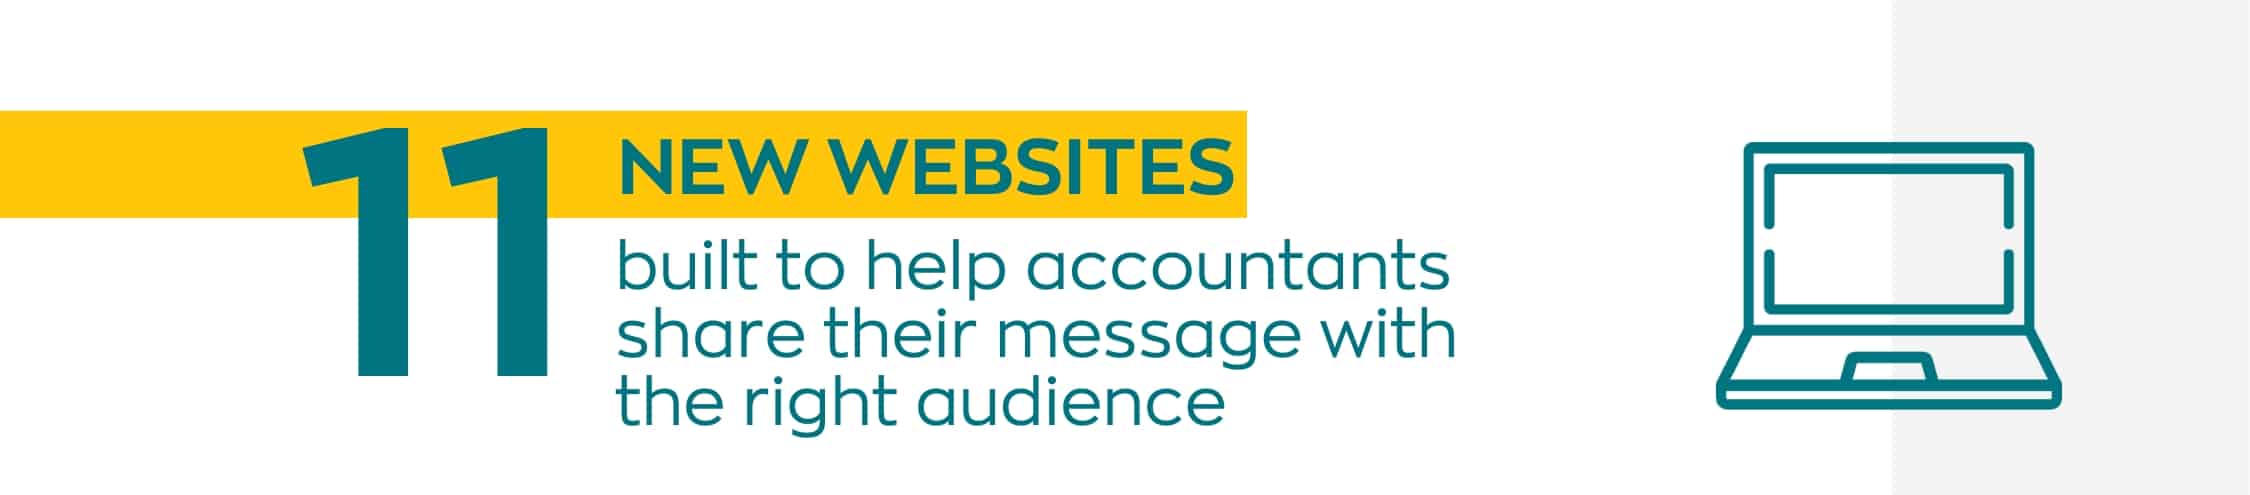 11 new websites built to help accountants share their message with the right audience